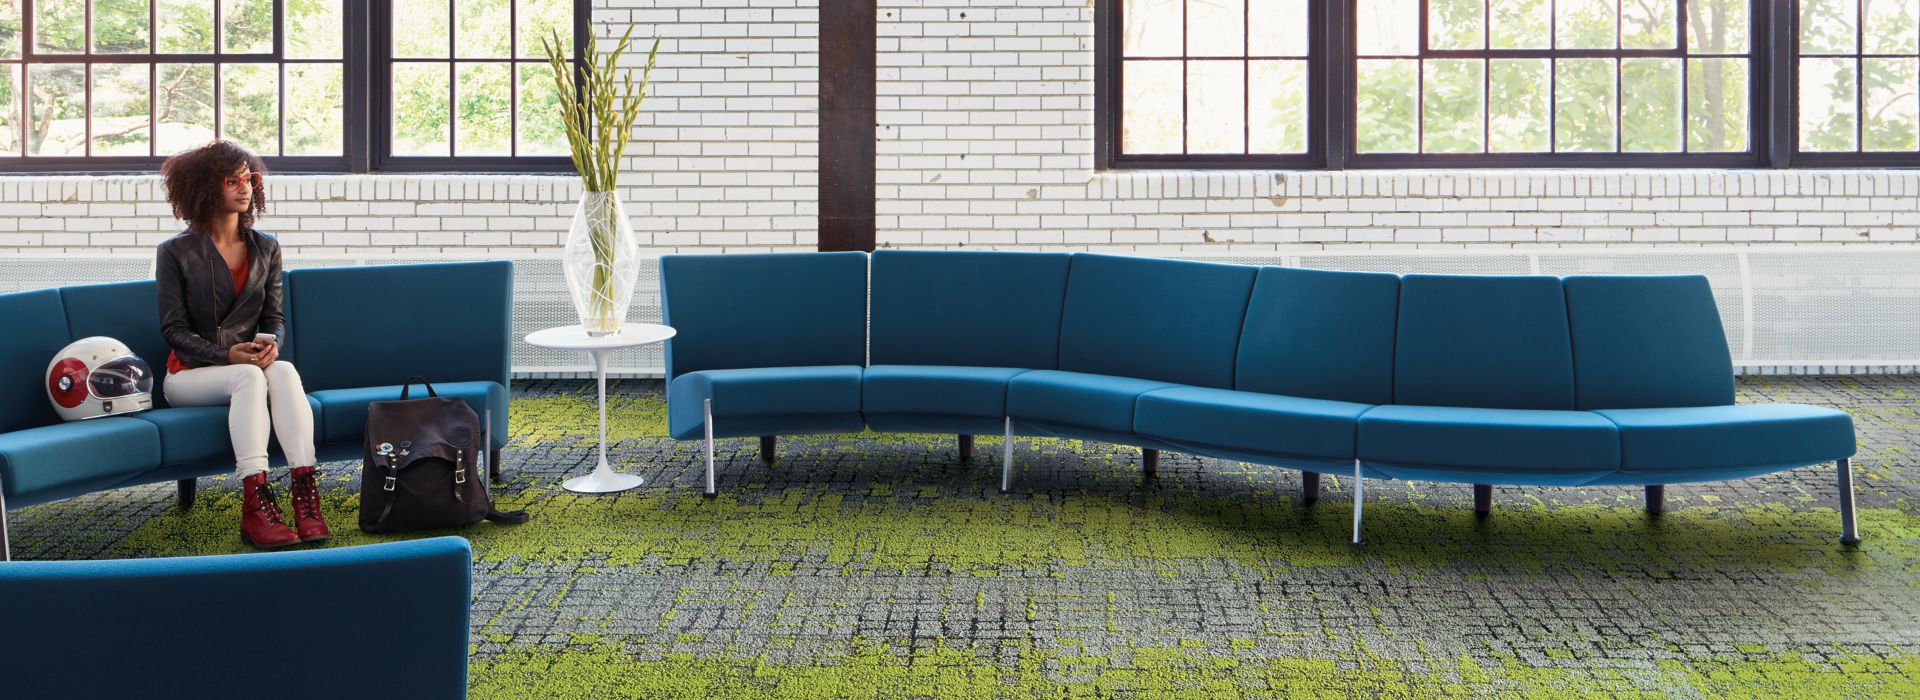 Interface Moss and Moss in Stone carpet tile in seating area with blue couches and women seated